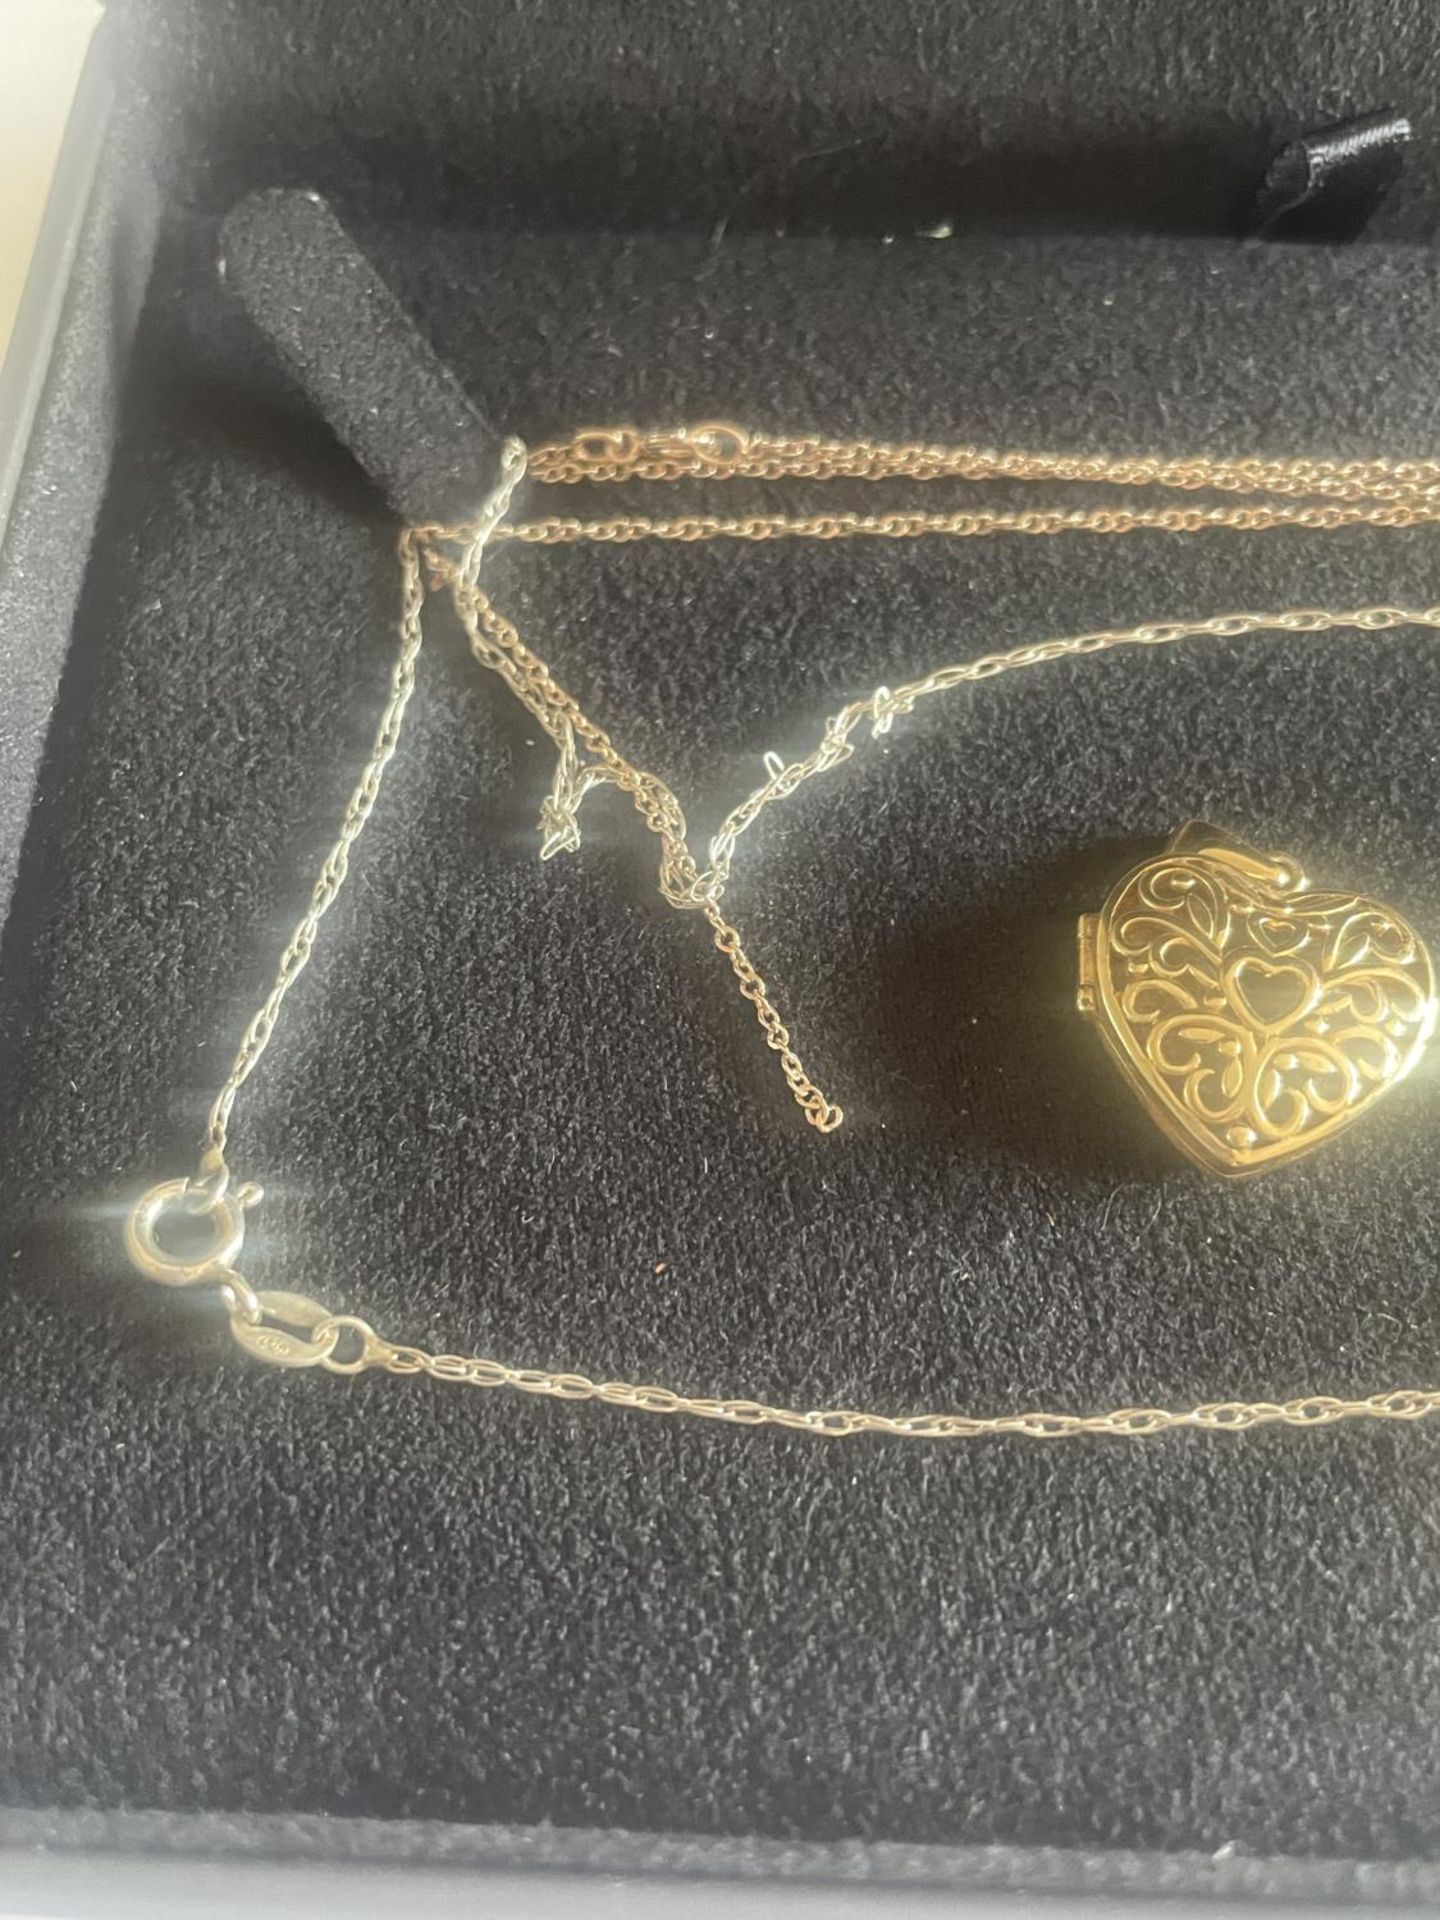 TWO SILVER GILT NECKLACES WITH HEART PENDANTS IN A PRESENTATION BOX - Image 3 of 3